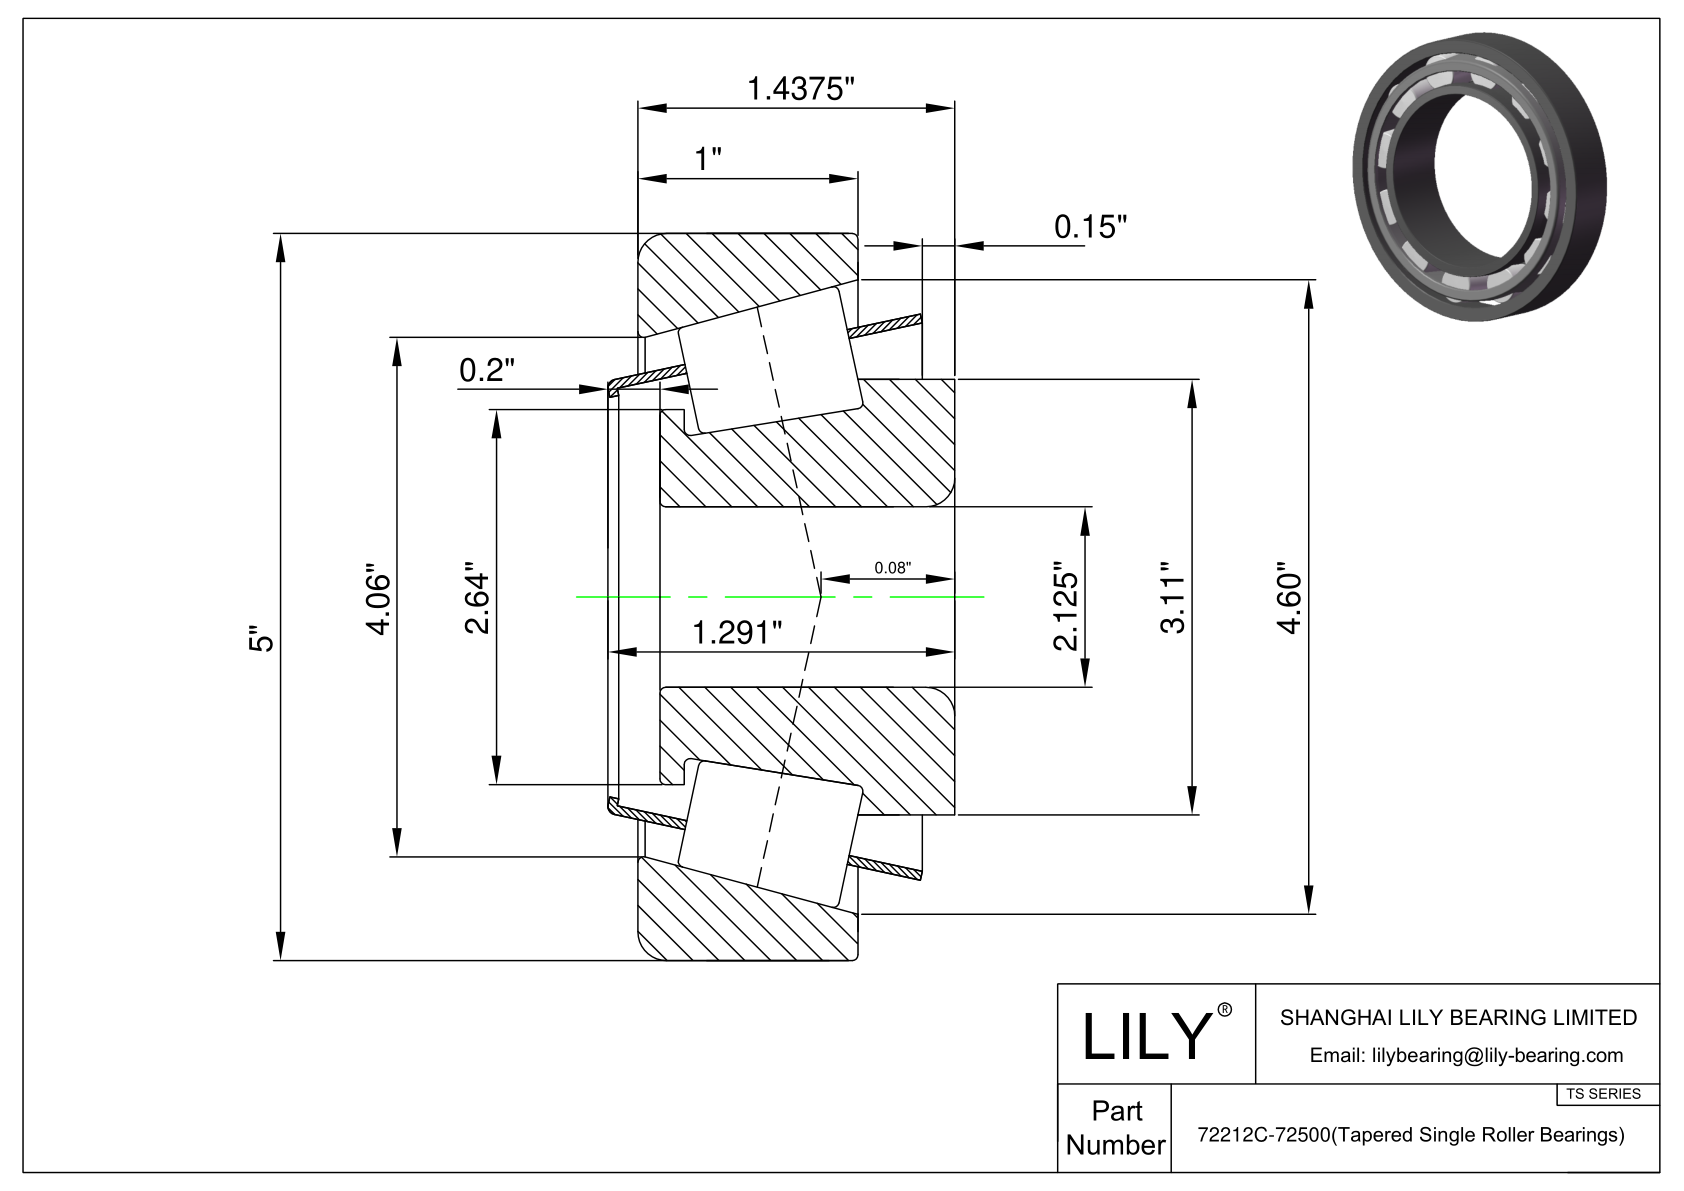 72212C-72500 TS (Tapered Single Roller Bearings) (Imperial) cad drawing